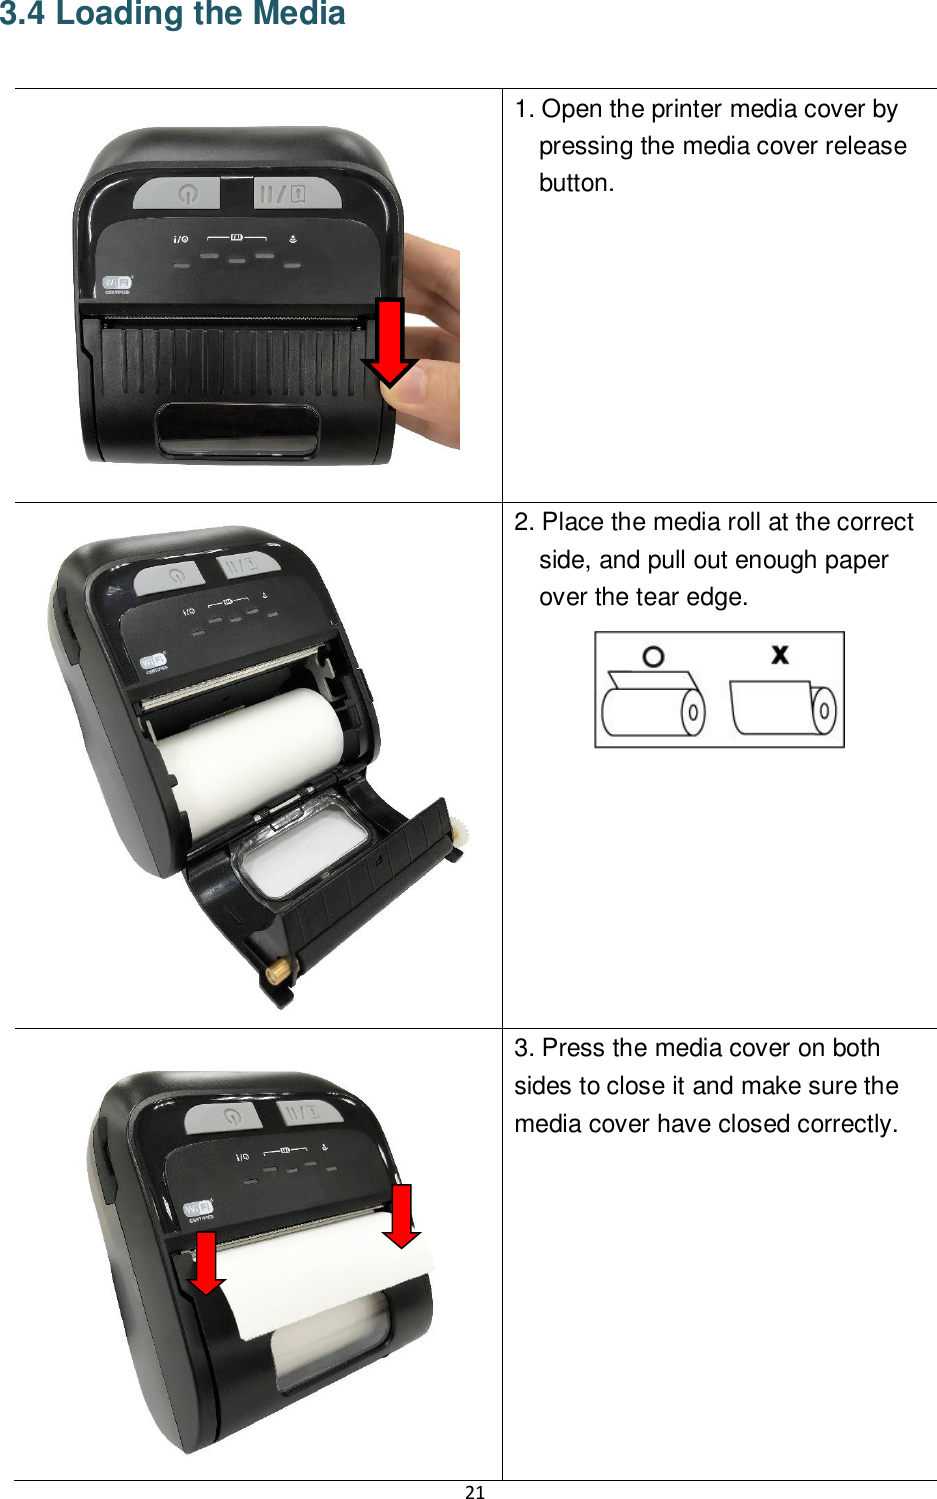 21  3.4 Loading the Media   1. Open the printer media cover by pressing the media cover release button.  2. Place the media roll at the correct side, and pull out enough paper over the tear edge.     3. Press the media cover on both sides to close it and make sure the media cover have closed correctly. 